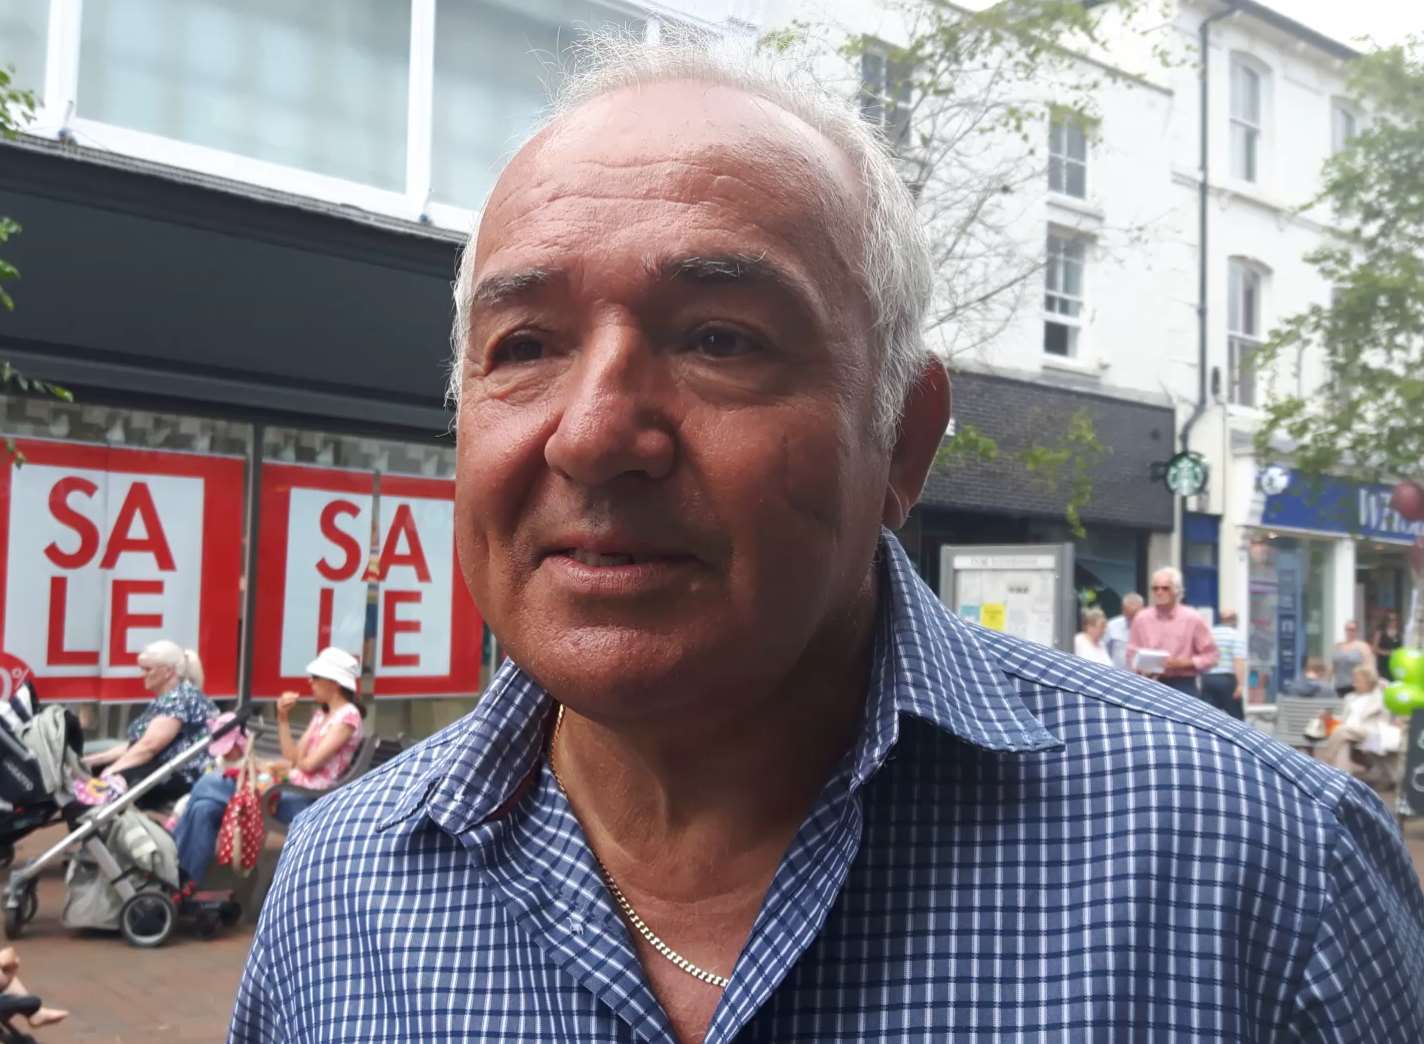 Charles LeBron, 64, originally from Malta, shared his opinion in Deal High Street